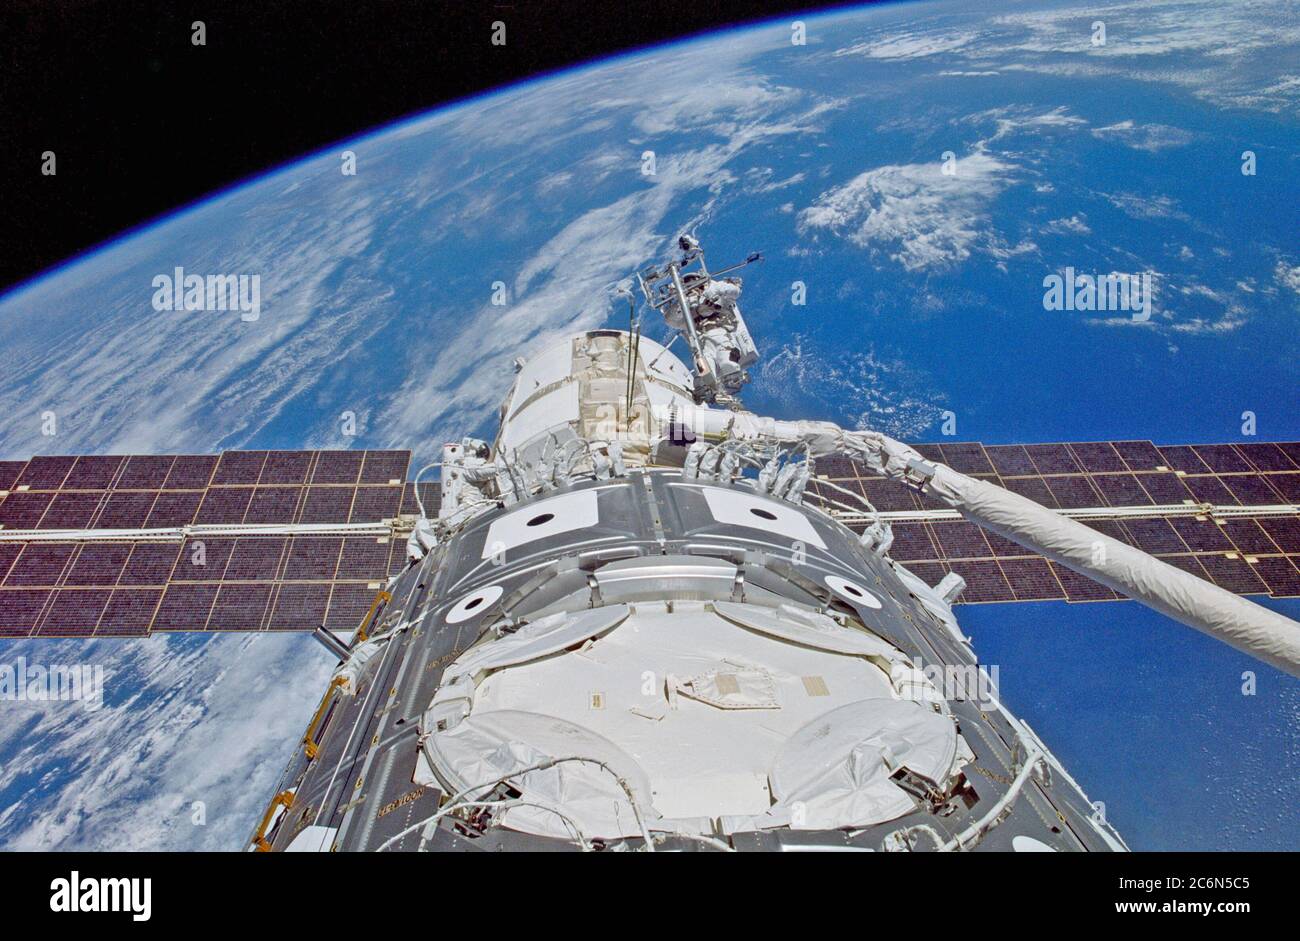 (4-15 December 1998) --- This photograph taken out the window of the Earth-orbiting Space Shuttle Endeavour shows the two astronaut spacewalkers, during one of three extravehicular activity (EVA) sessions, readying the recently-connected Russian-built FGB Module (Zarya) and the United States-built Unity Module (Node 1).  The two EVA astronauts are mission specialists James H. Newman (right)and Jerry L. Ross (lower left with red stripe on suit). Stock Photo